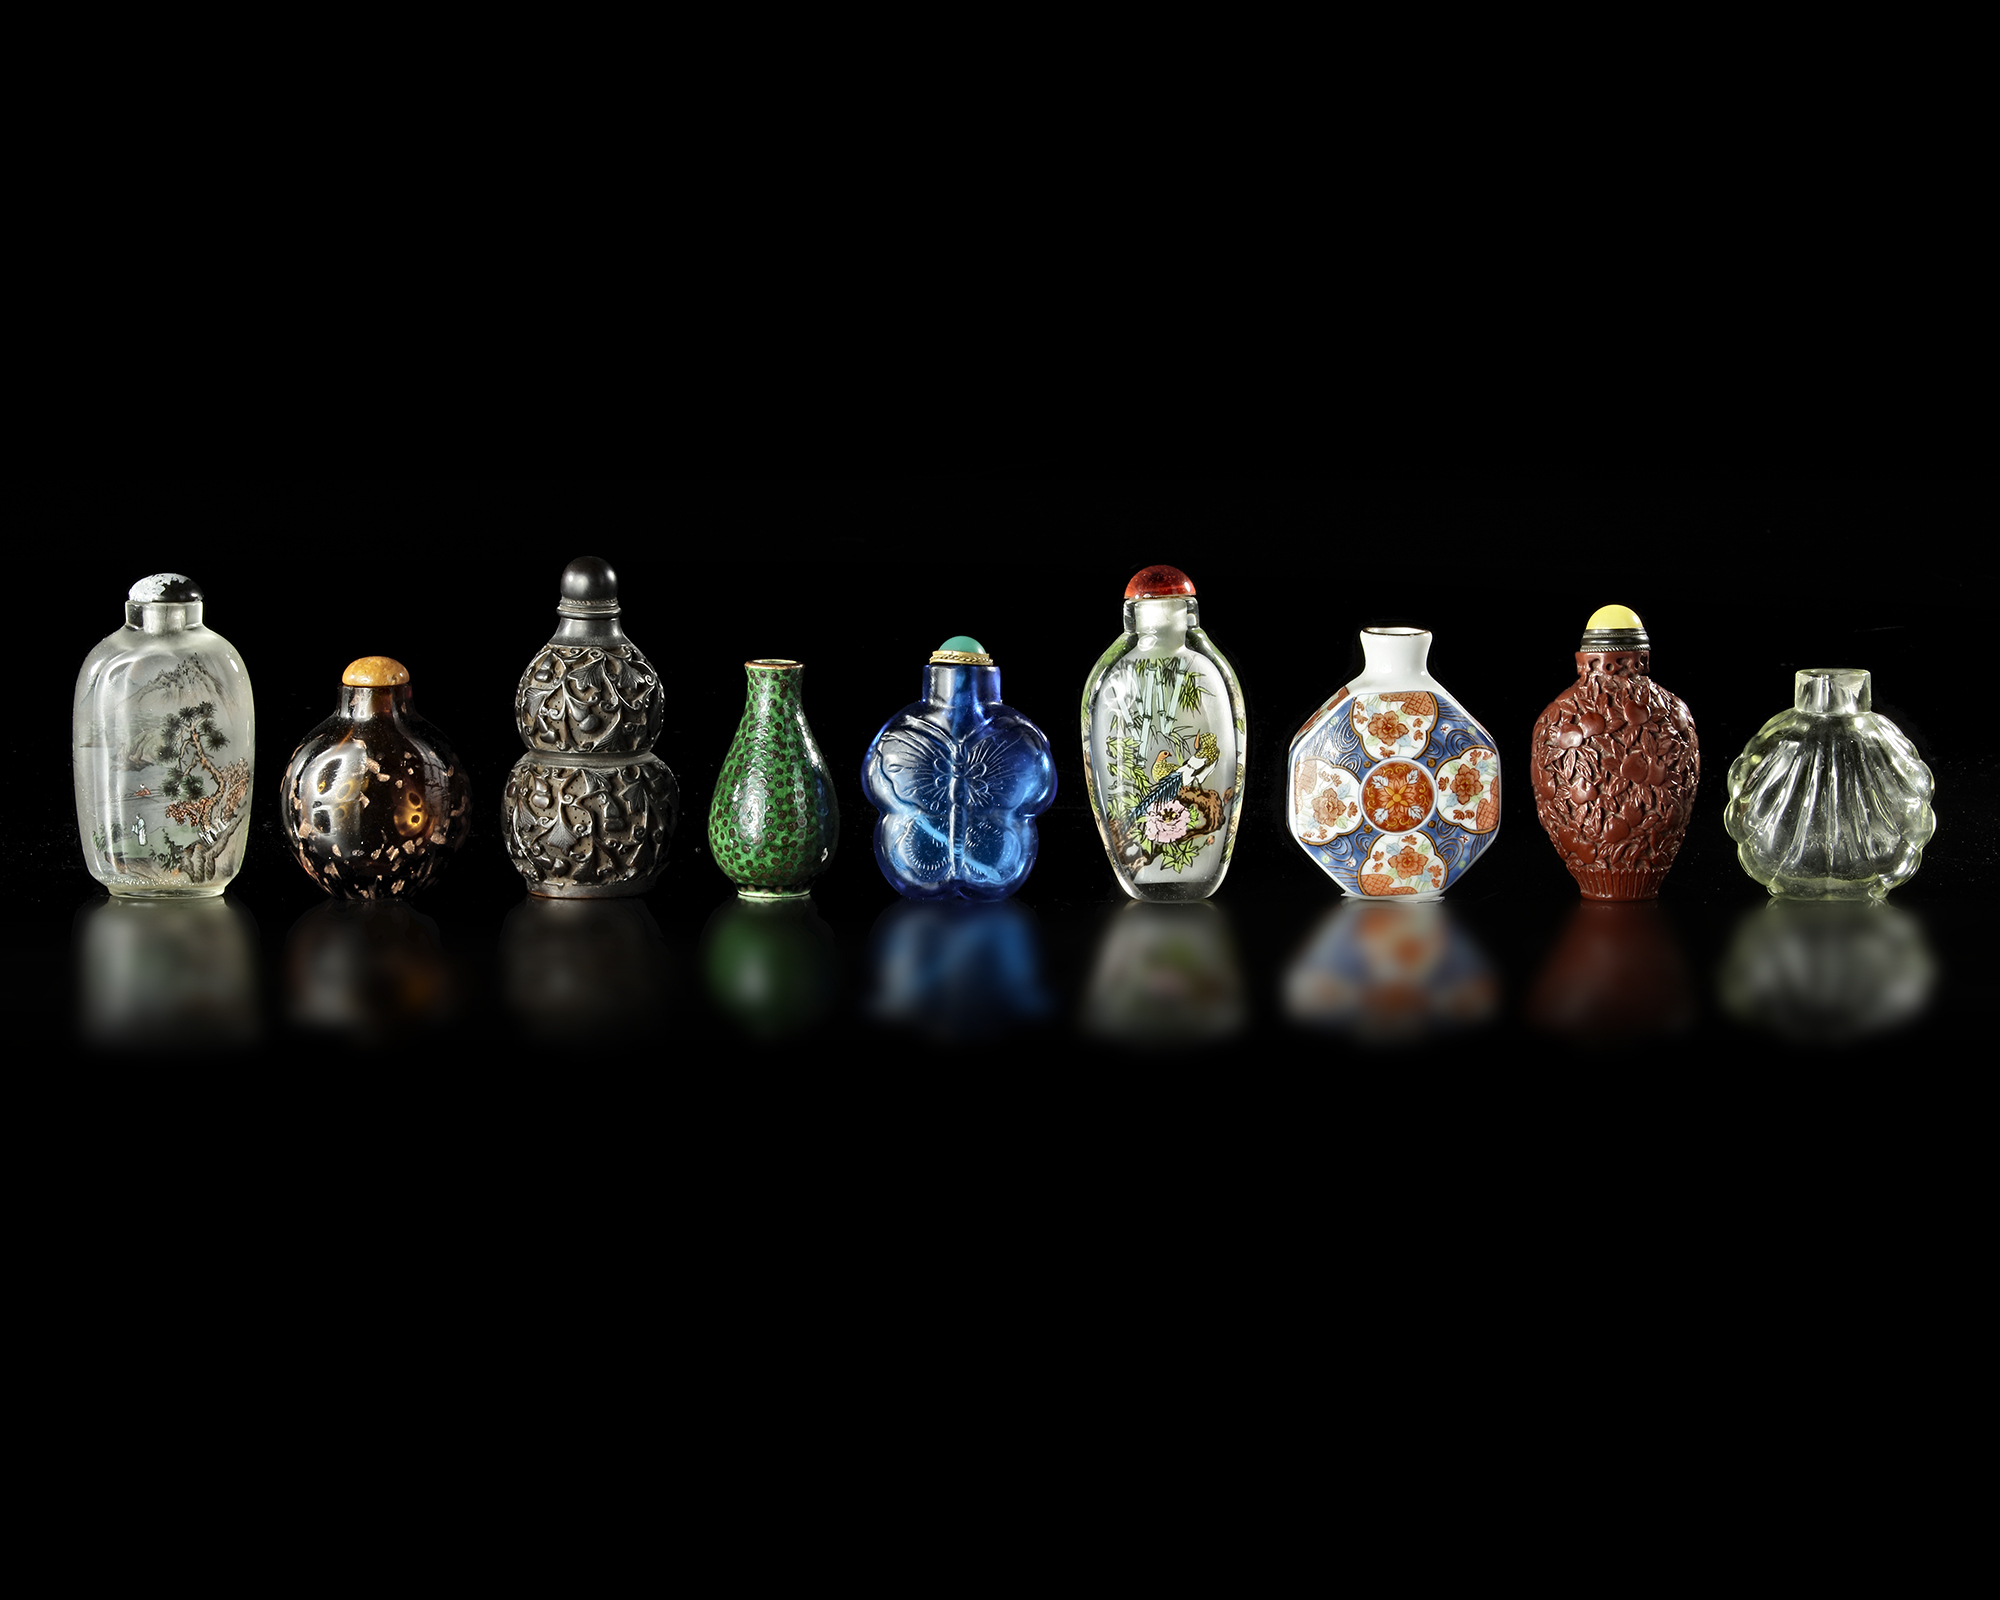 A COLLECTION OF 9 SNUFF BOTTLES IN VARIOUS MATERIALS, QING DYNASTY (1644-1911) - Image 2 of 2